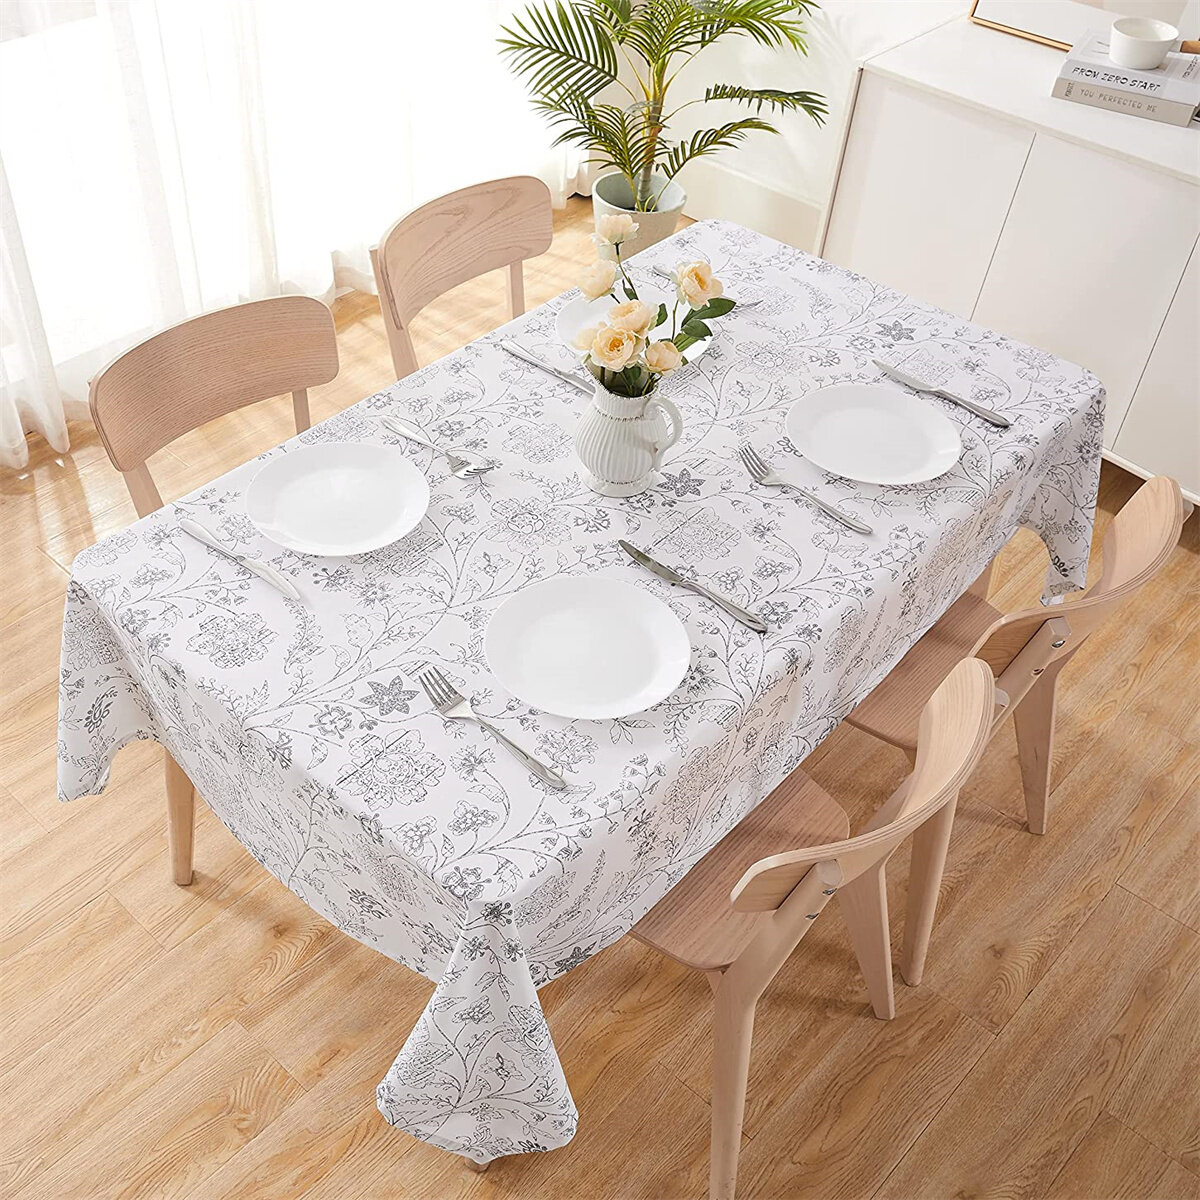 Large Cotton Table Cloth Waterproof Tablecloth Kitchen Dining Decor Cover Linen